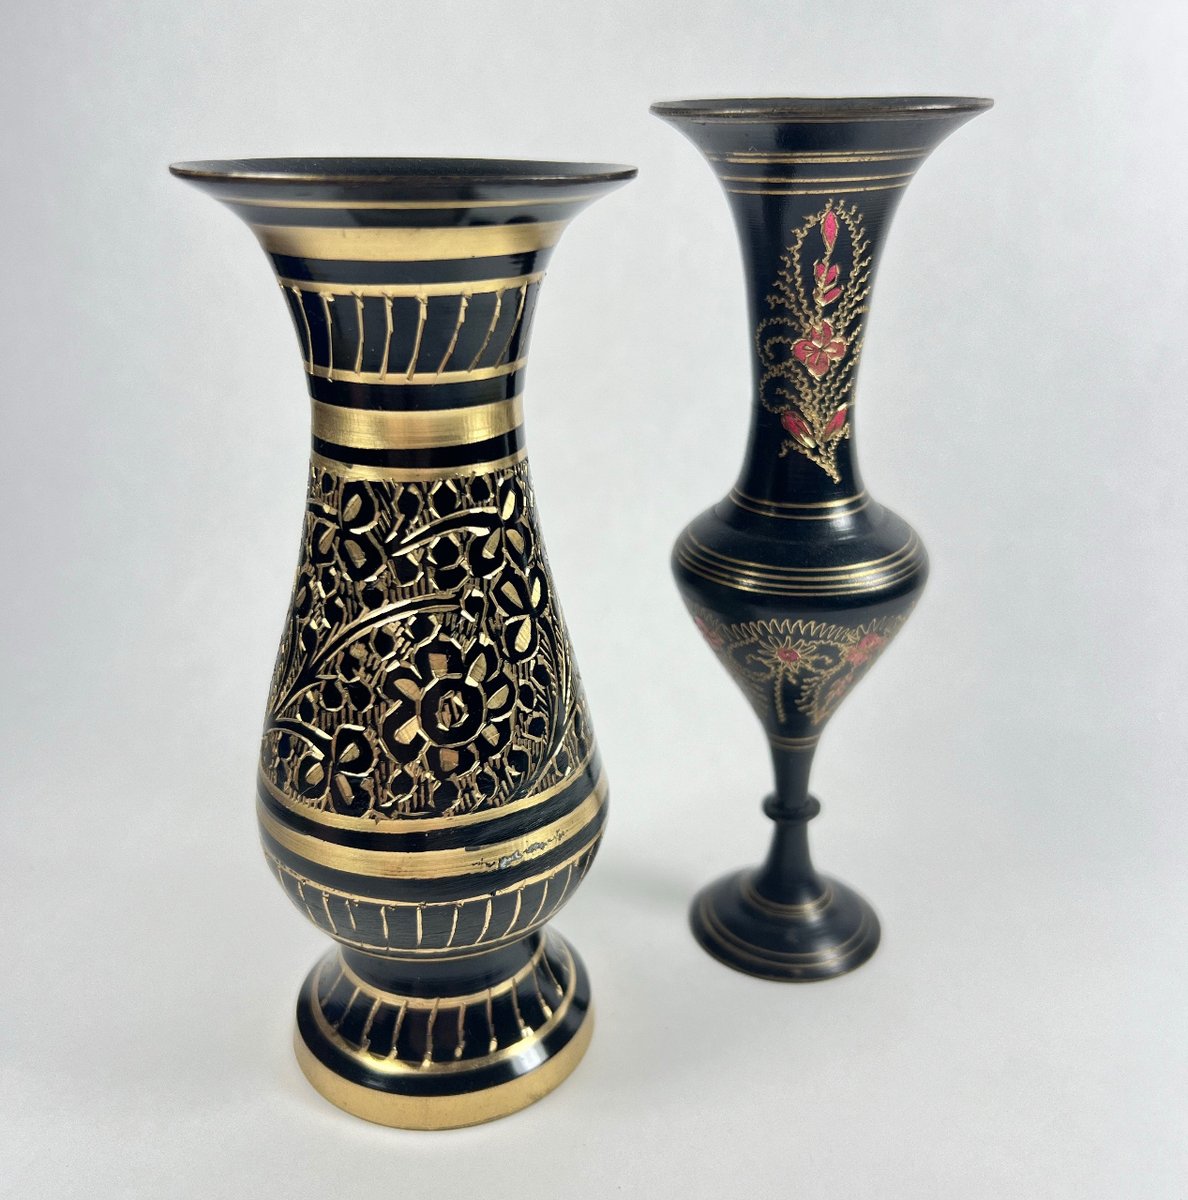 I always enjoy the contrast and detail work with this type of Brass India Bud Vases. These ones are now up on our site. 
.
#rogue518 #roguesalvagegifts #roguesalvage #vintageshop #thriftyfinds #indiabudvase #budvase